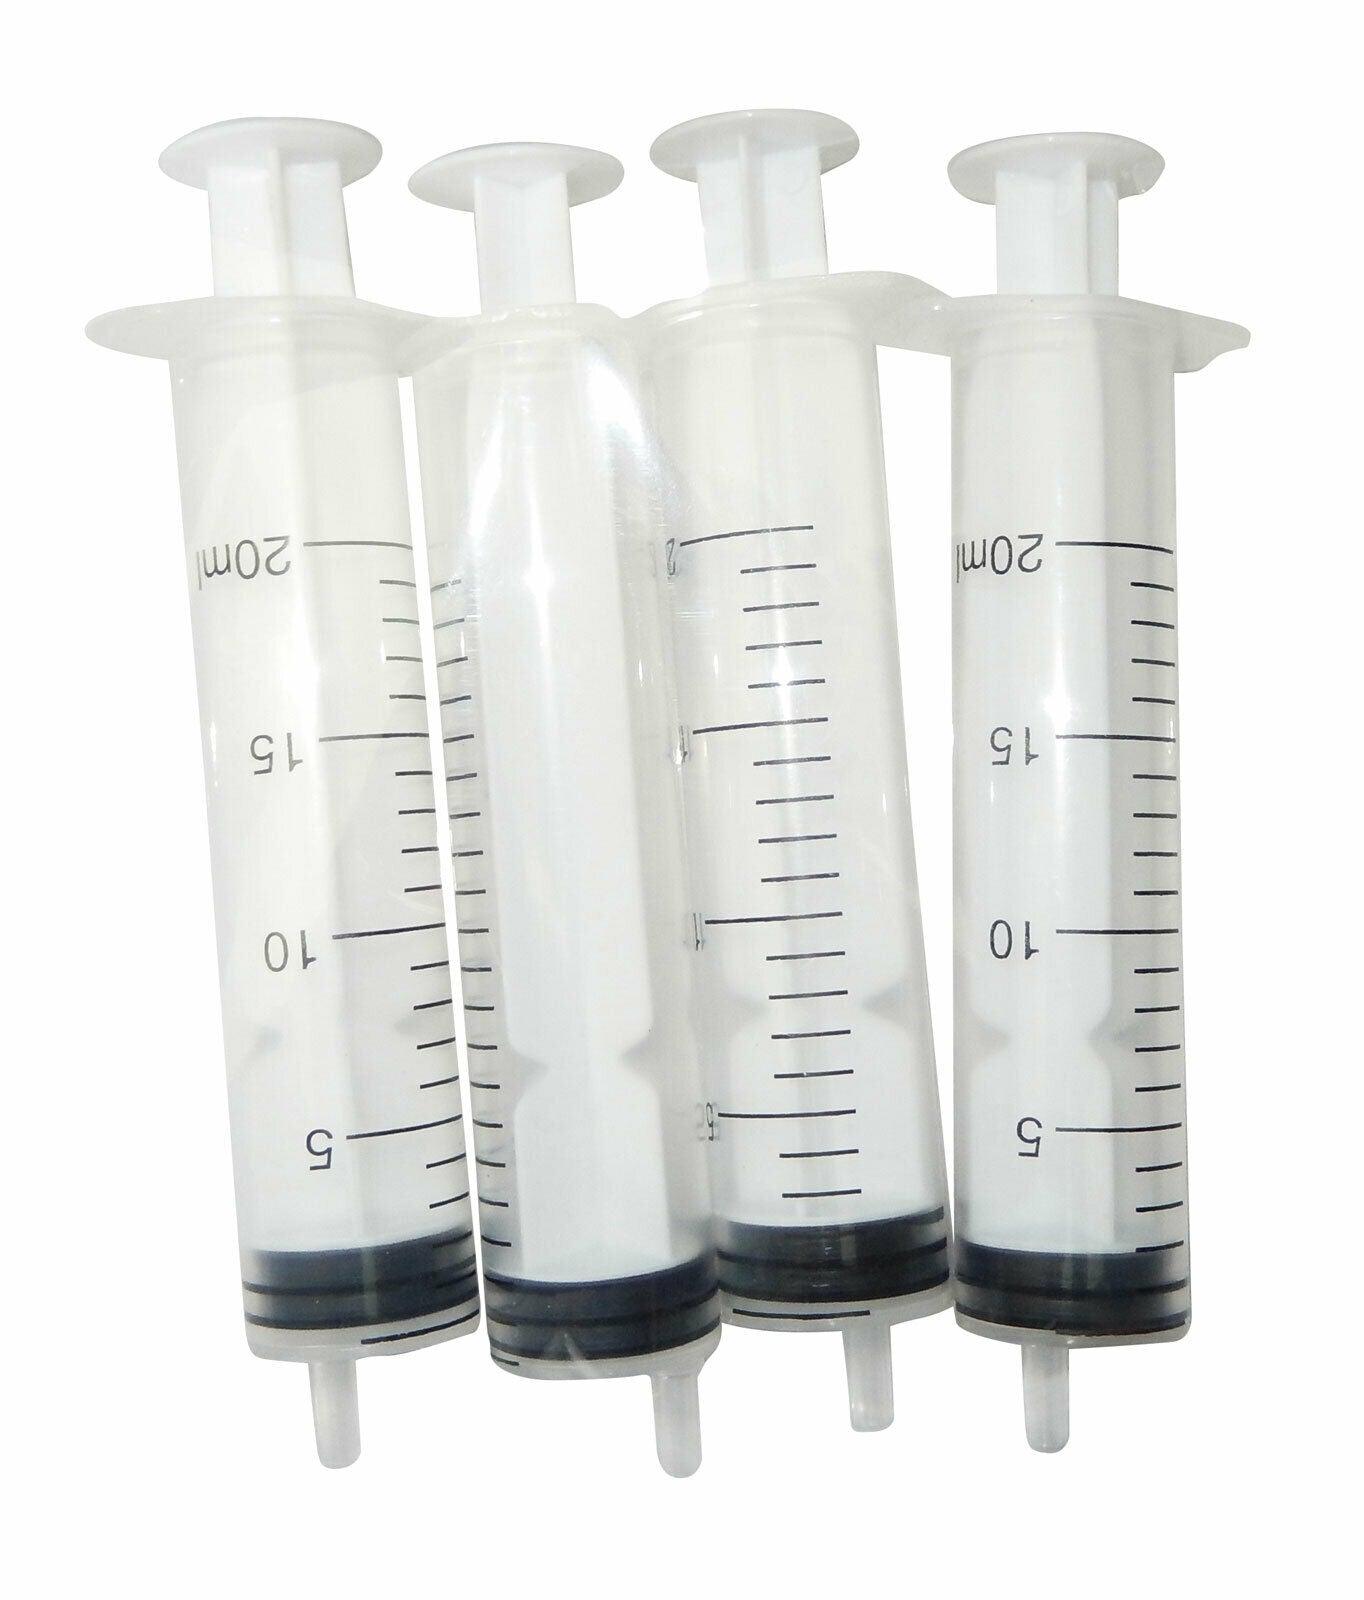 Nurse Doctor Monster Shot Syringe Pack of 4 Halloween Horror Party Accessory - Labreeze